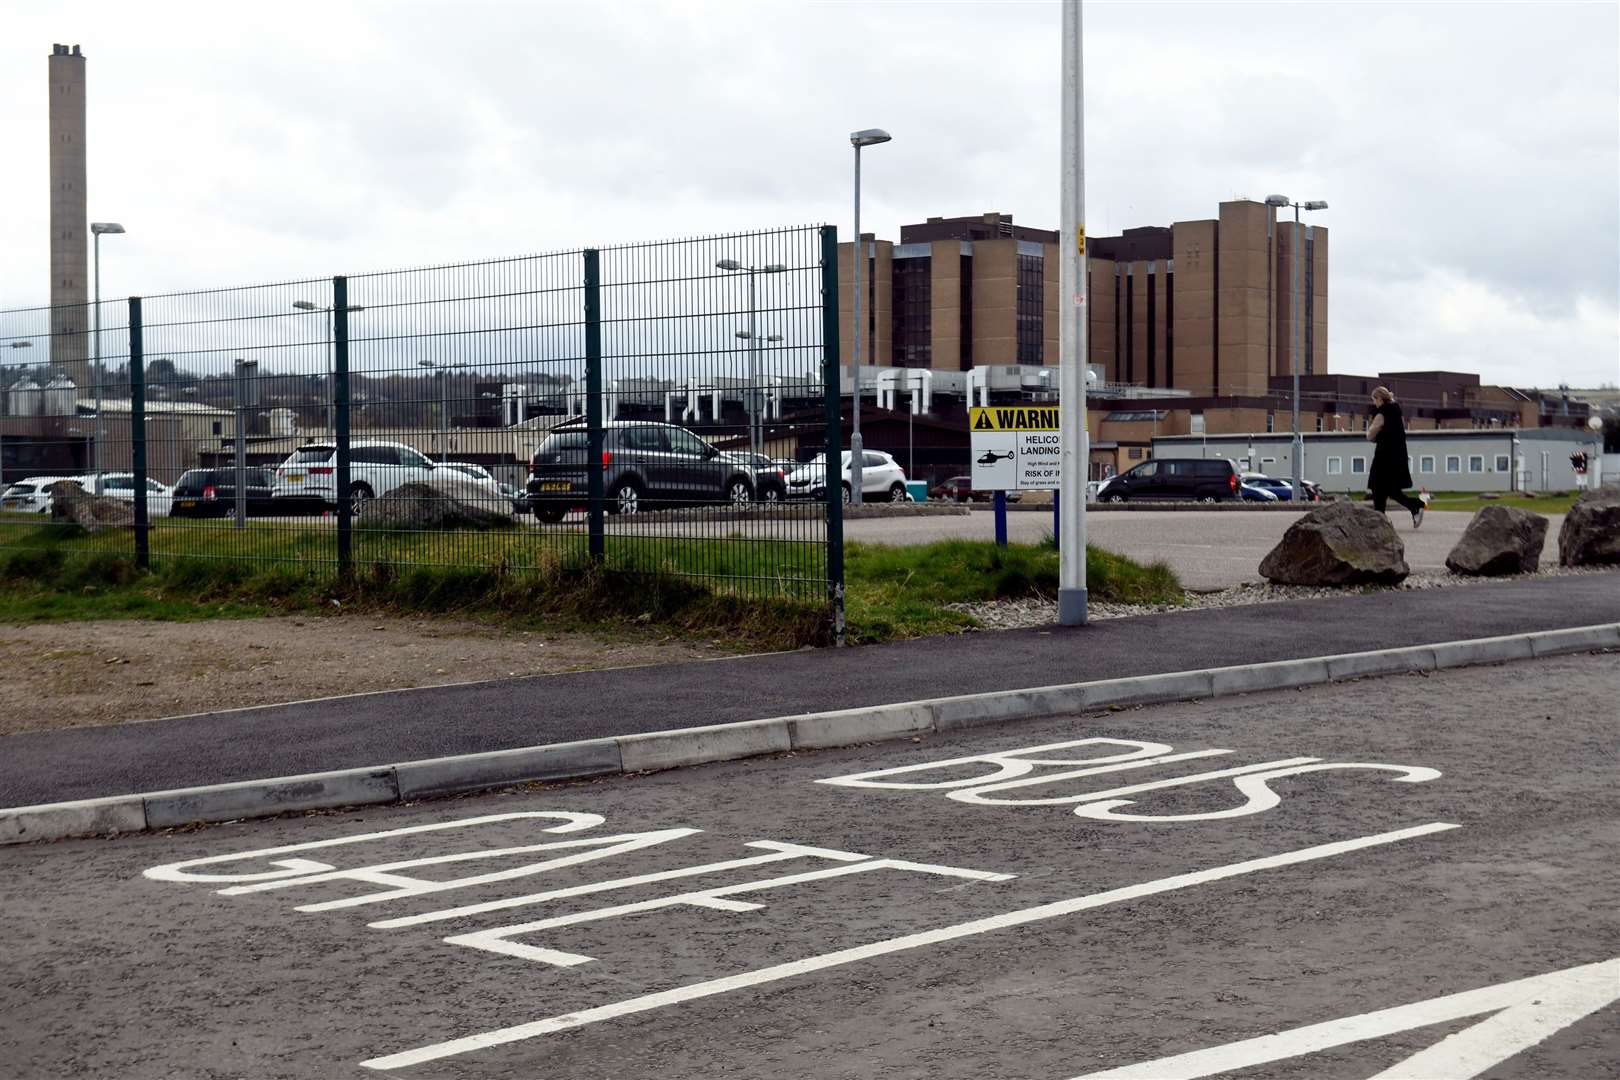 The new bus gate aims to improve services in the area. Picture: James Mackenzie